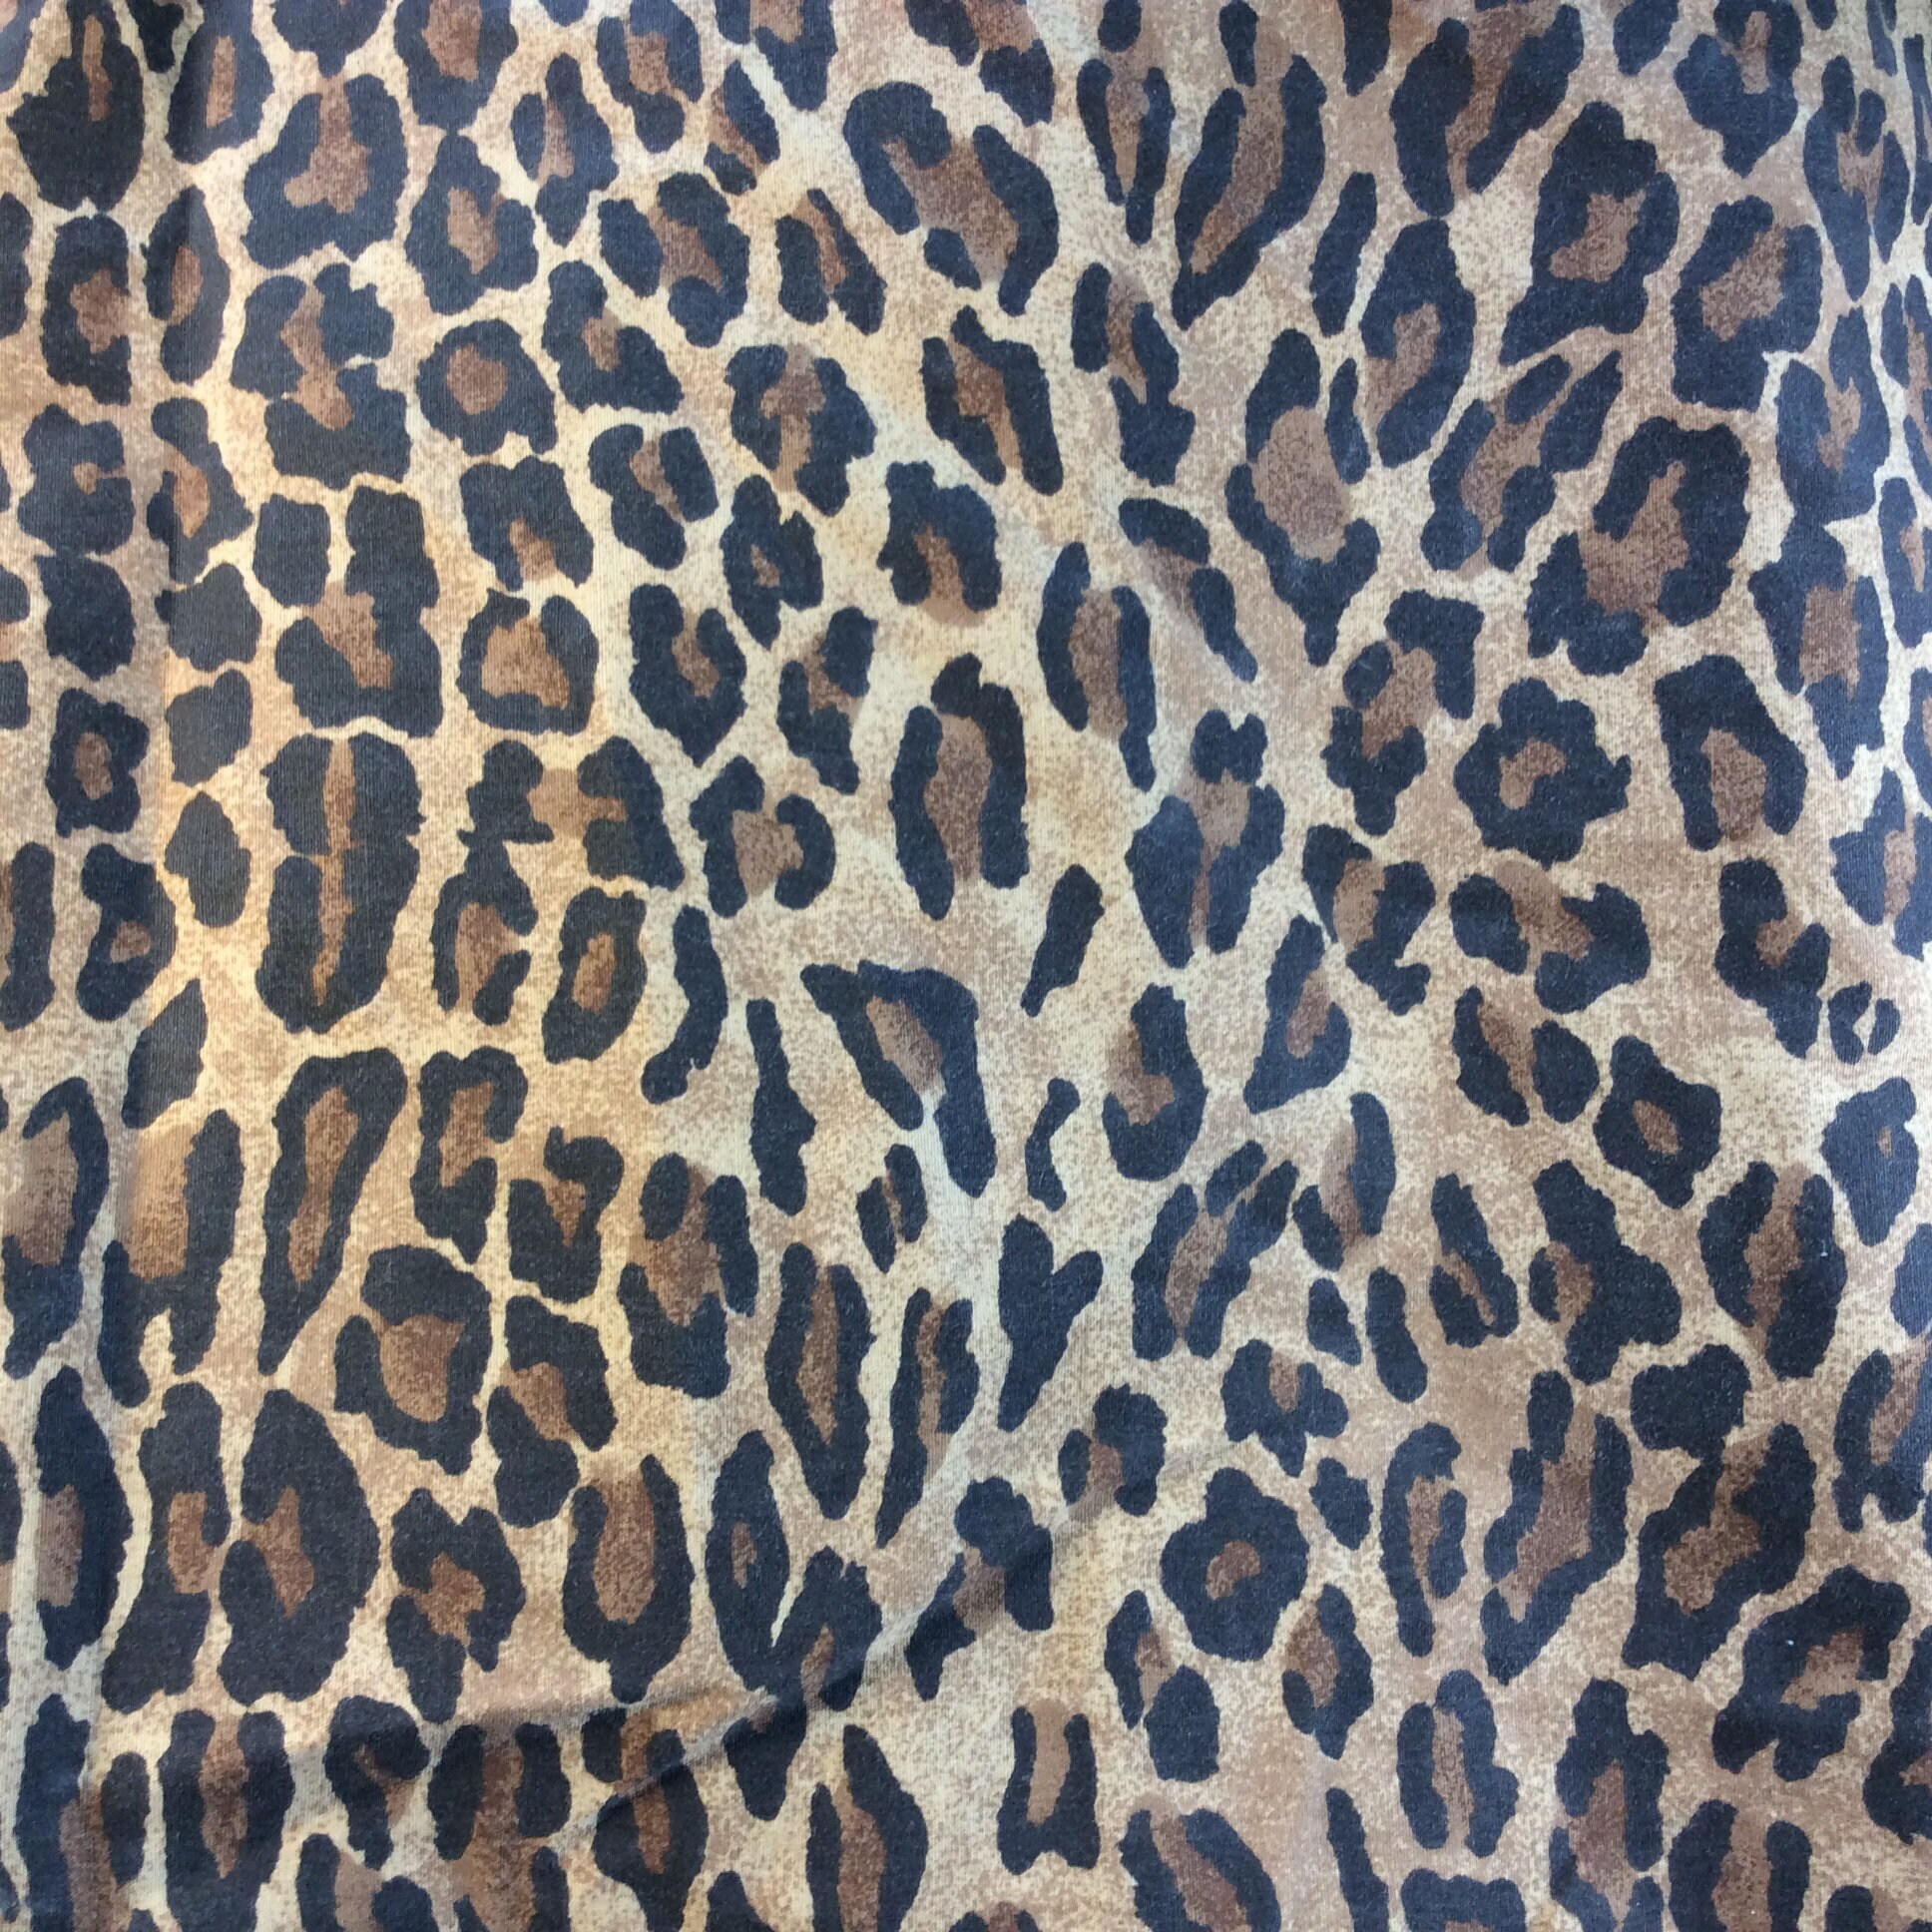 Vintage Sheet Full Fitted Leopard print 50 cotton/ 50 | Etsy